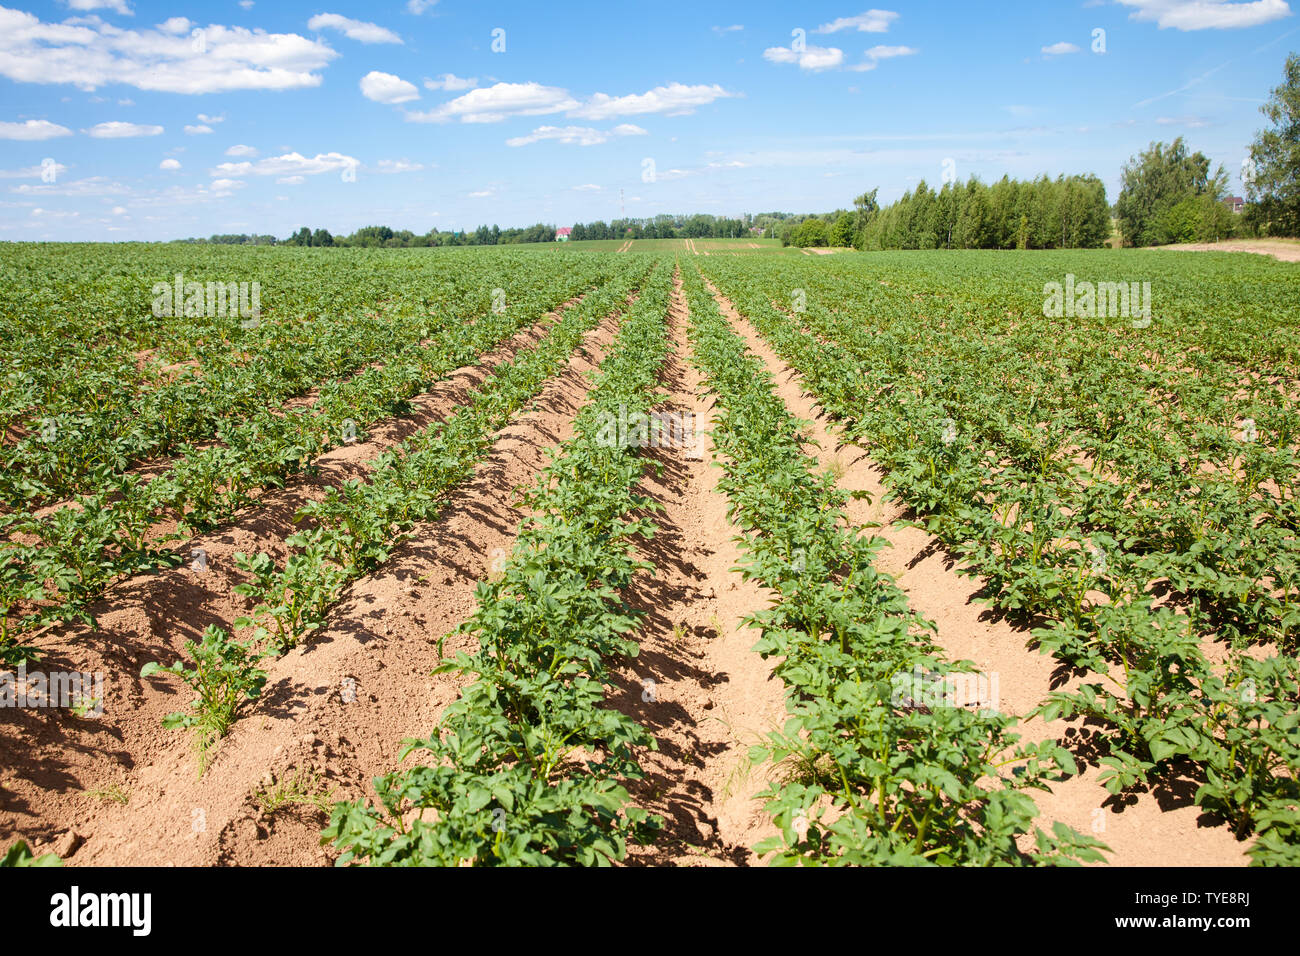 Rows of potatoes on the farm field. Cultivation of potatoes in Russia. Landscape with agricultural fields in sunny weather. Landscape with agricultural fields in sunny weather. A field of potatoes in the countryside. Stock Photo